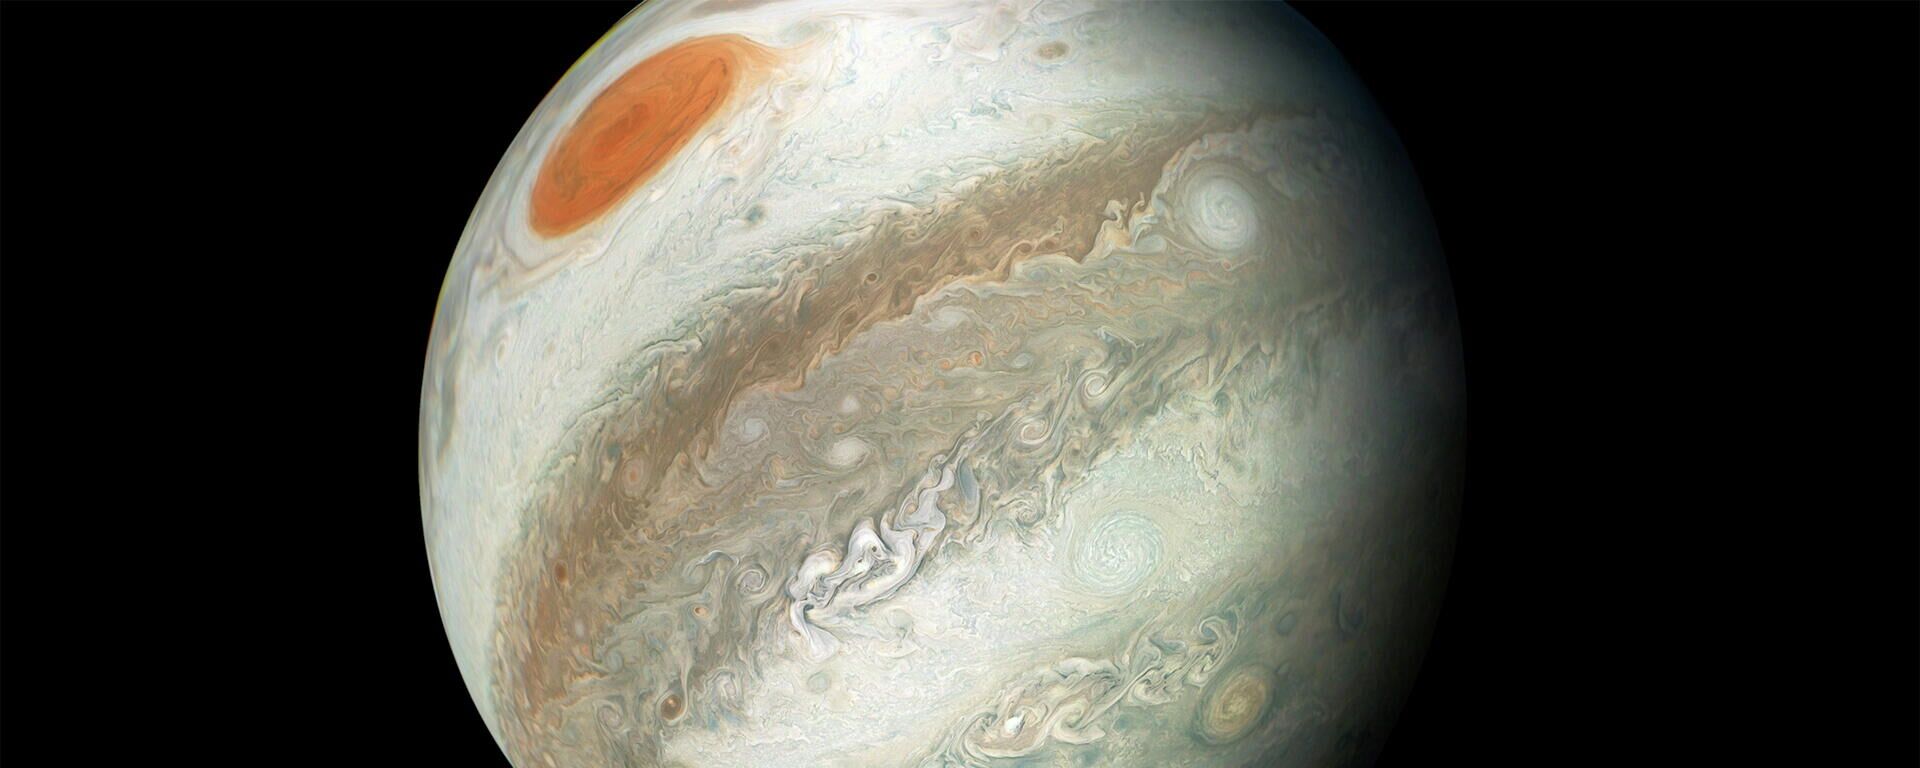 The view shows Jupiter including its Great red Spot captured by NASA's Juno spacecraft on the outbound leg of its 12th close flyby of the gas giant planet, April 1, 2018. - Sputnik International, 1920, 13.07.2022